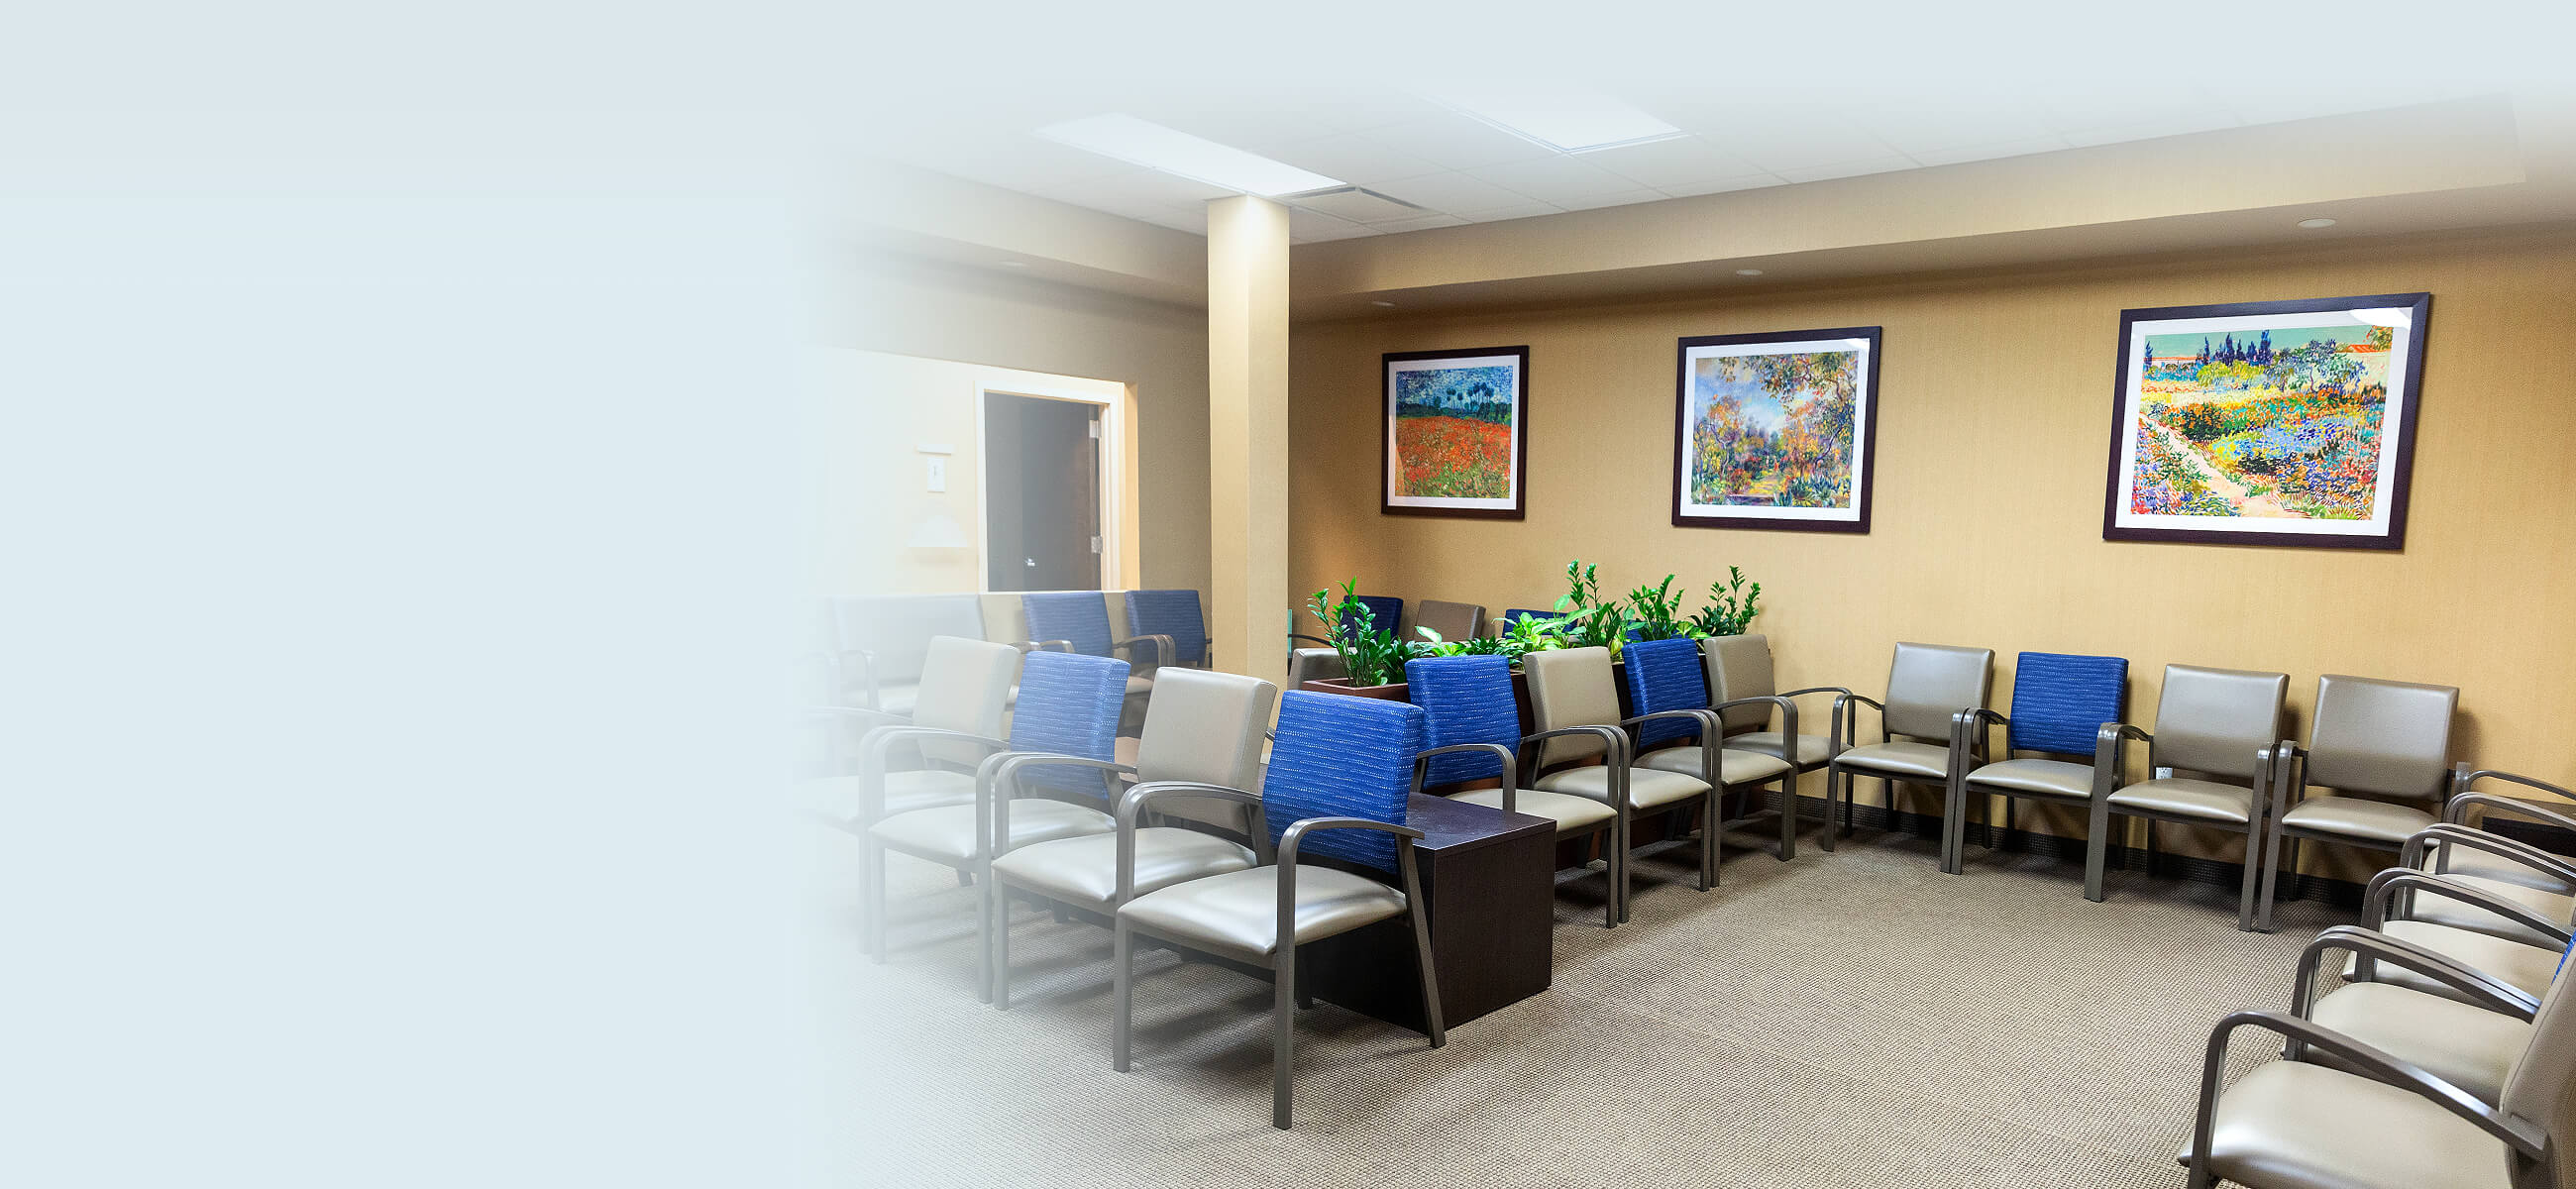 midwest retina clinic